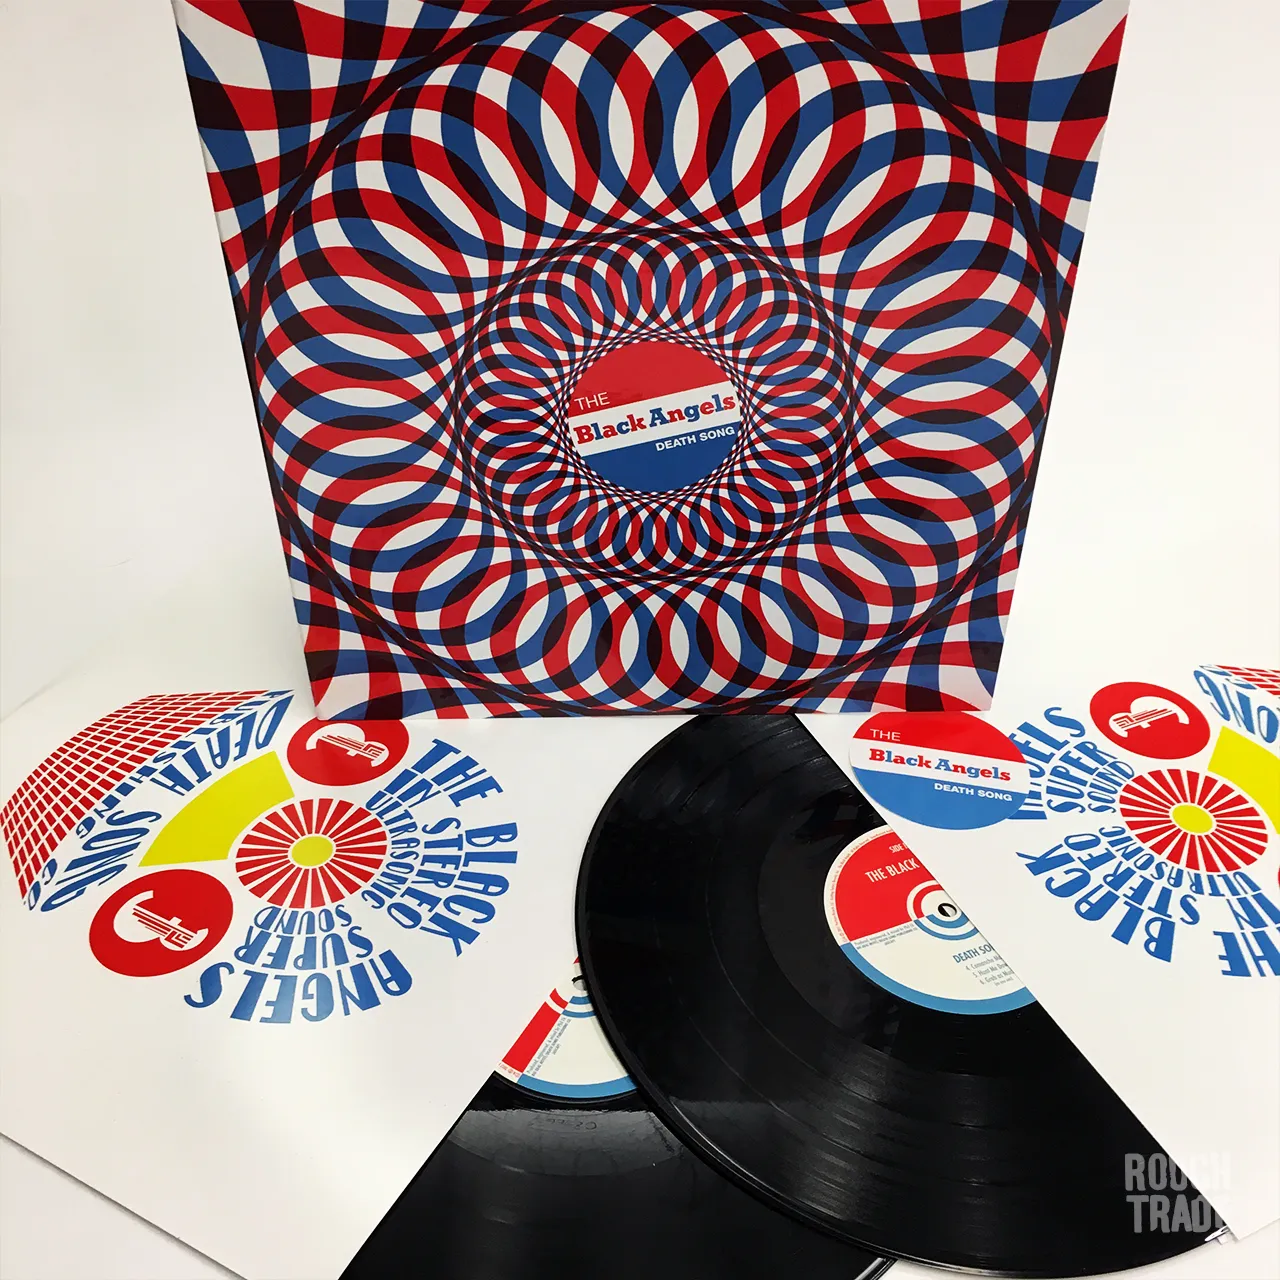 <strong>The Black Angels - Death Song</strong> (Vinyl LP)